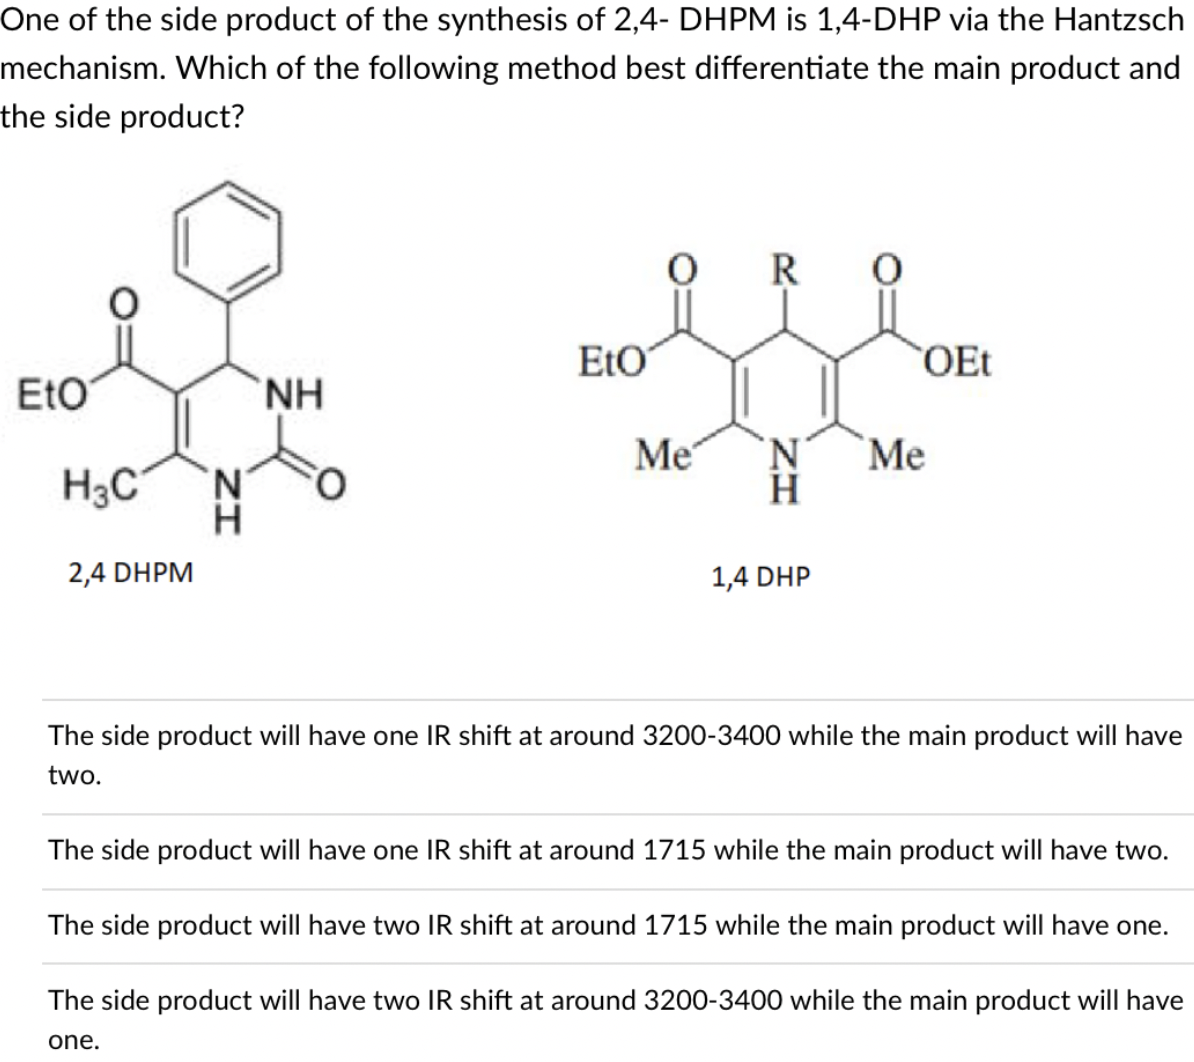 One of the side product of the synthesis of 2,4- DHPM is 1,4-DHP via the Hantzsch
mechanism. Which of the following method best differentiate the main product and
the side product?
R
EtO
OEt
EtO
H.
Me
N'
`Me
N.
H3C
H.
H
2,4 DHPM
1,4 DHP
The side product will have one IR shift at around 3200-3400 while the main product will have
two.
The side product will have one IR shift at around 1715 while the main product will have two.
The side product will have two IR shift at around 1715 while the main product will have one.
The side product will have two IR shift at around 3200-3400 while the main product will have
one.
